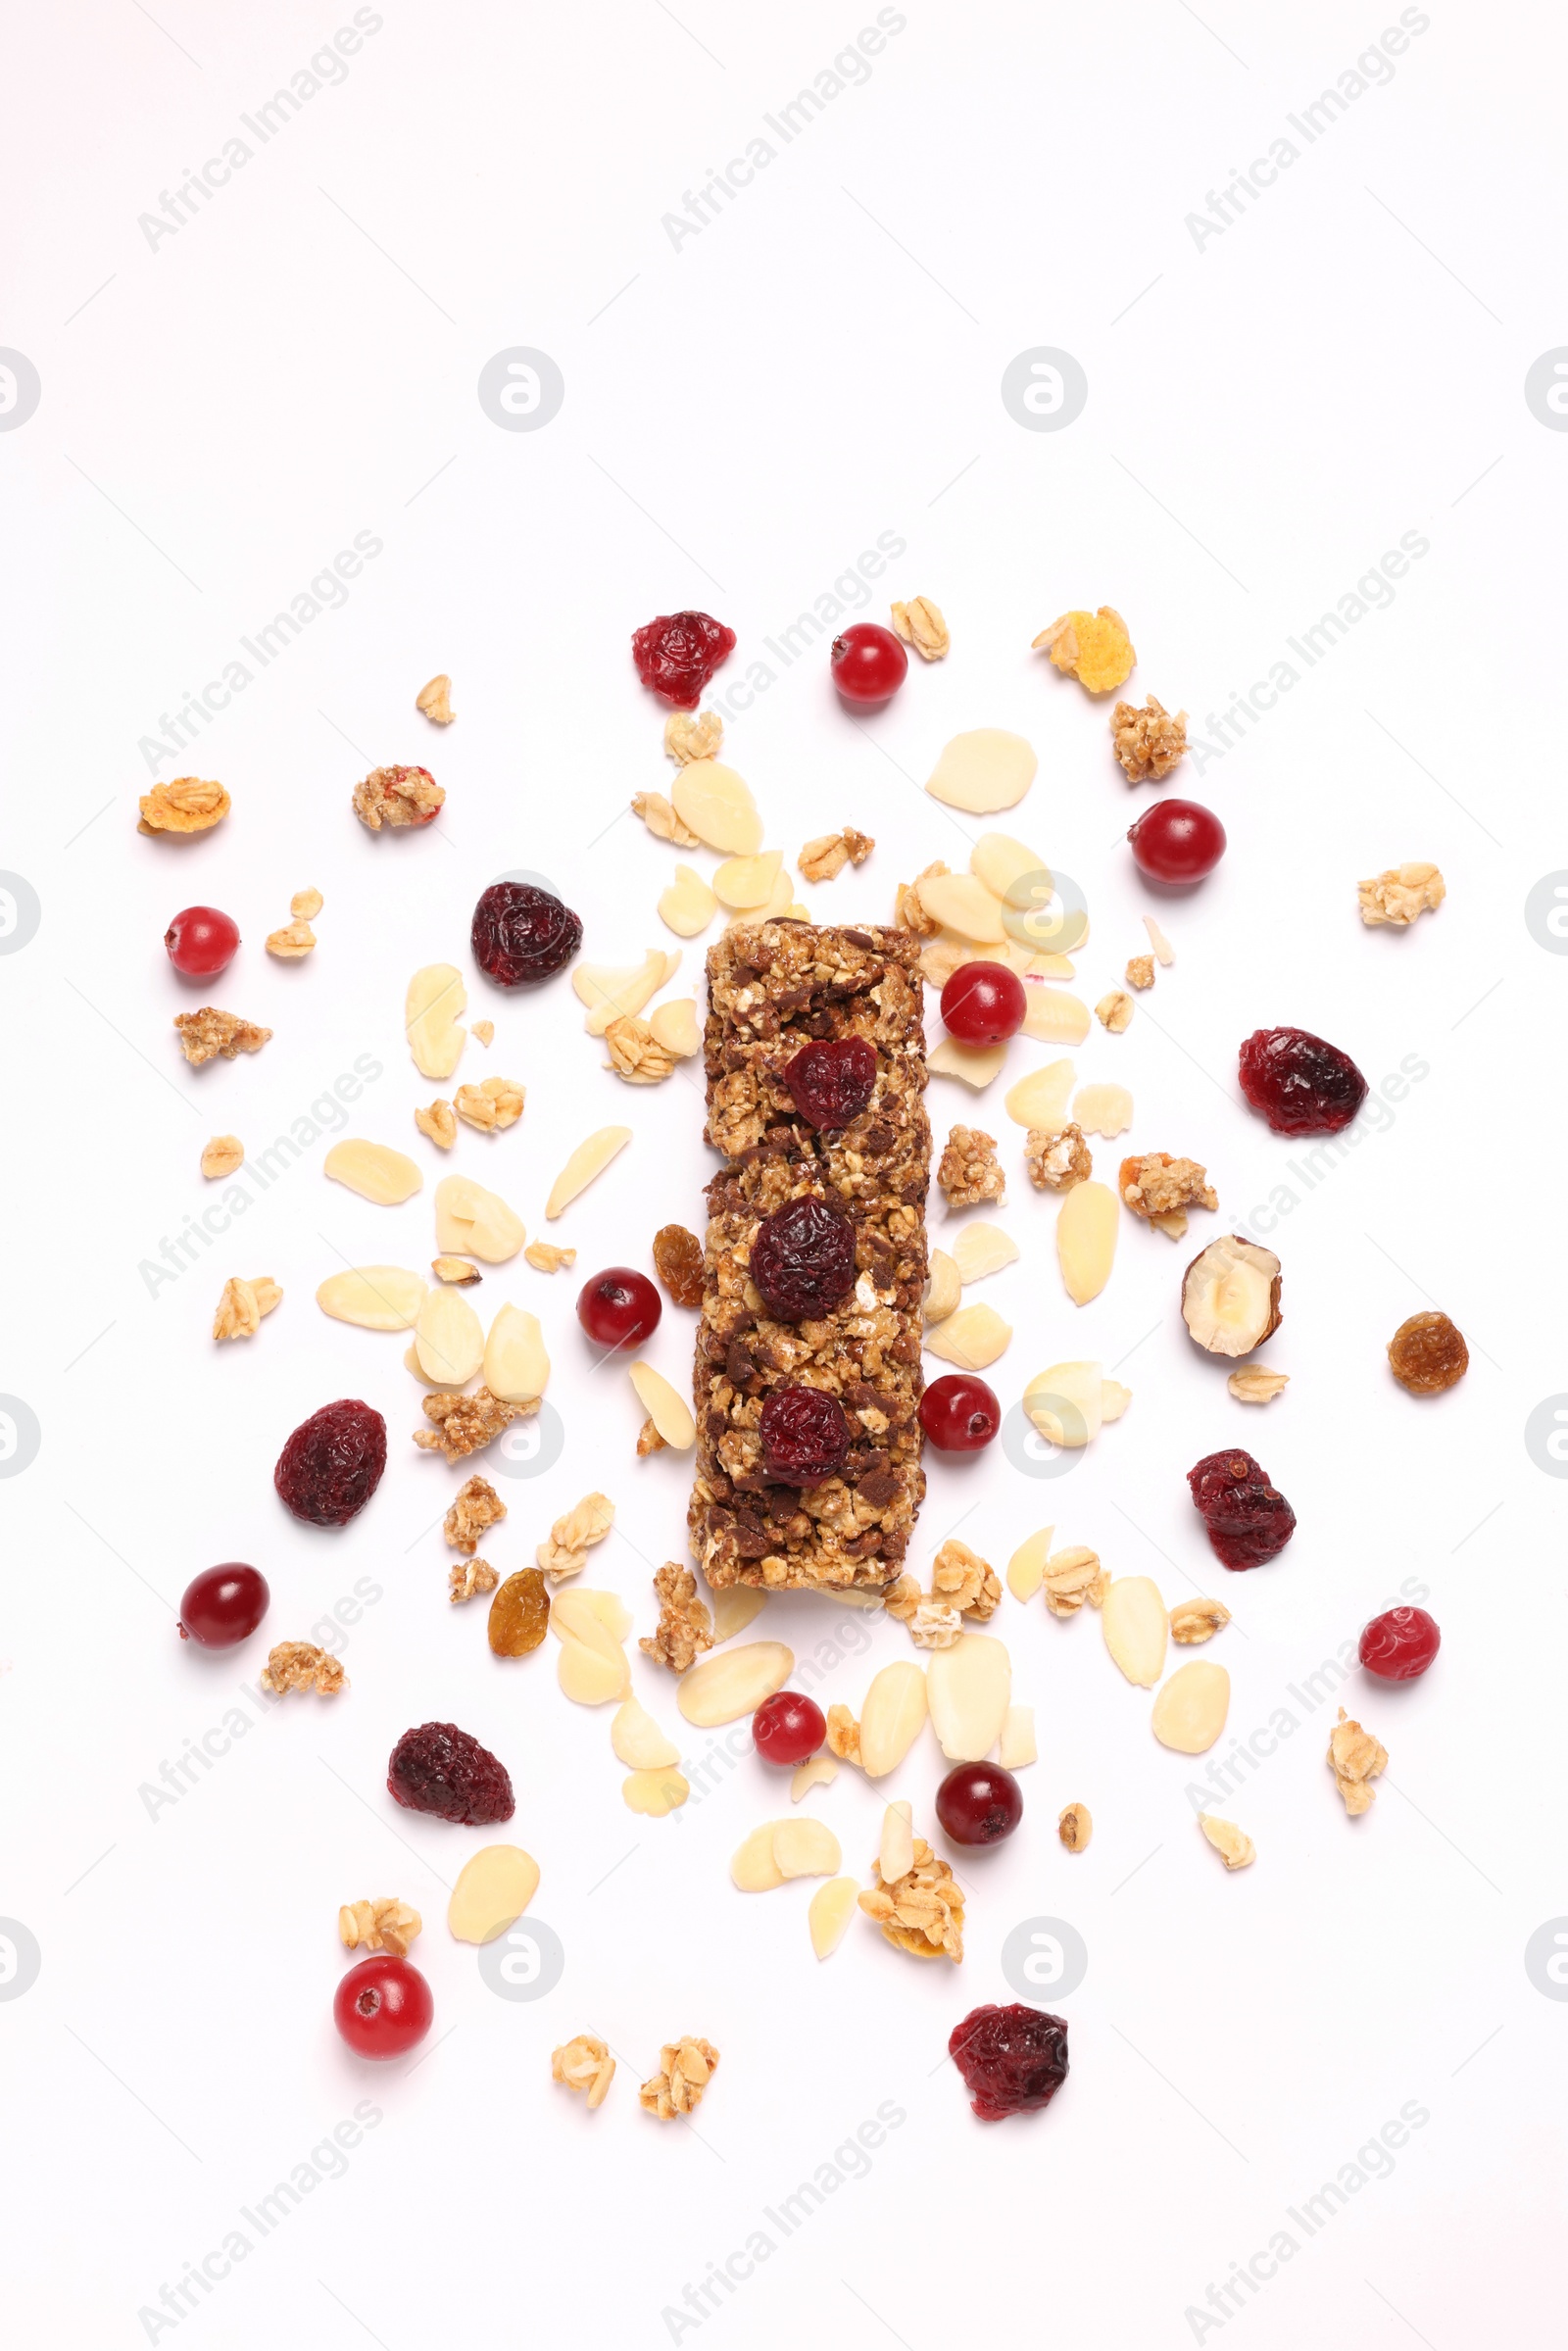 Photo of Tasty granola bar and ingredients isolated on white, top view